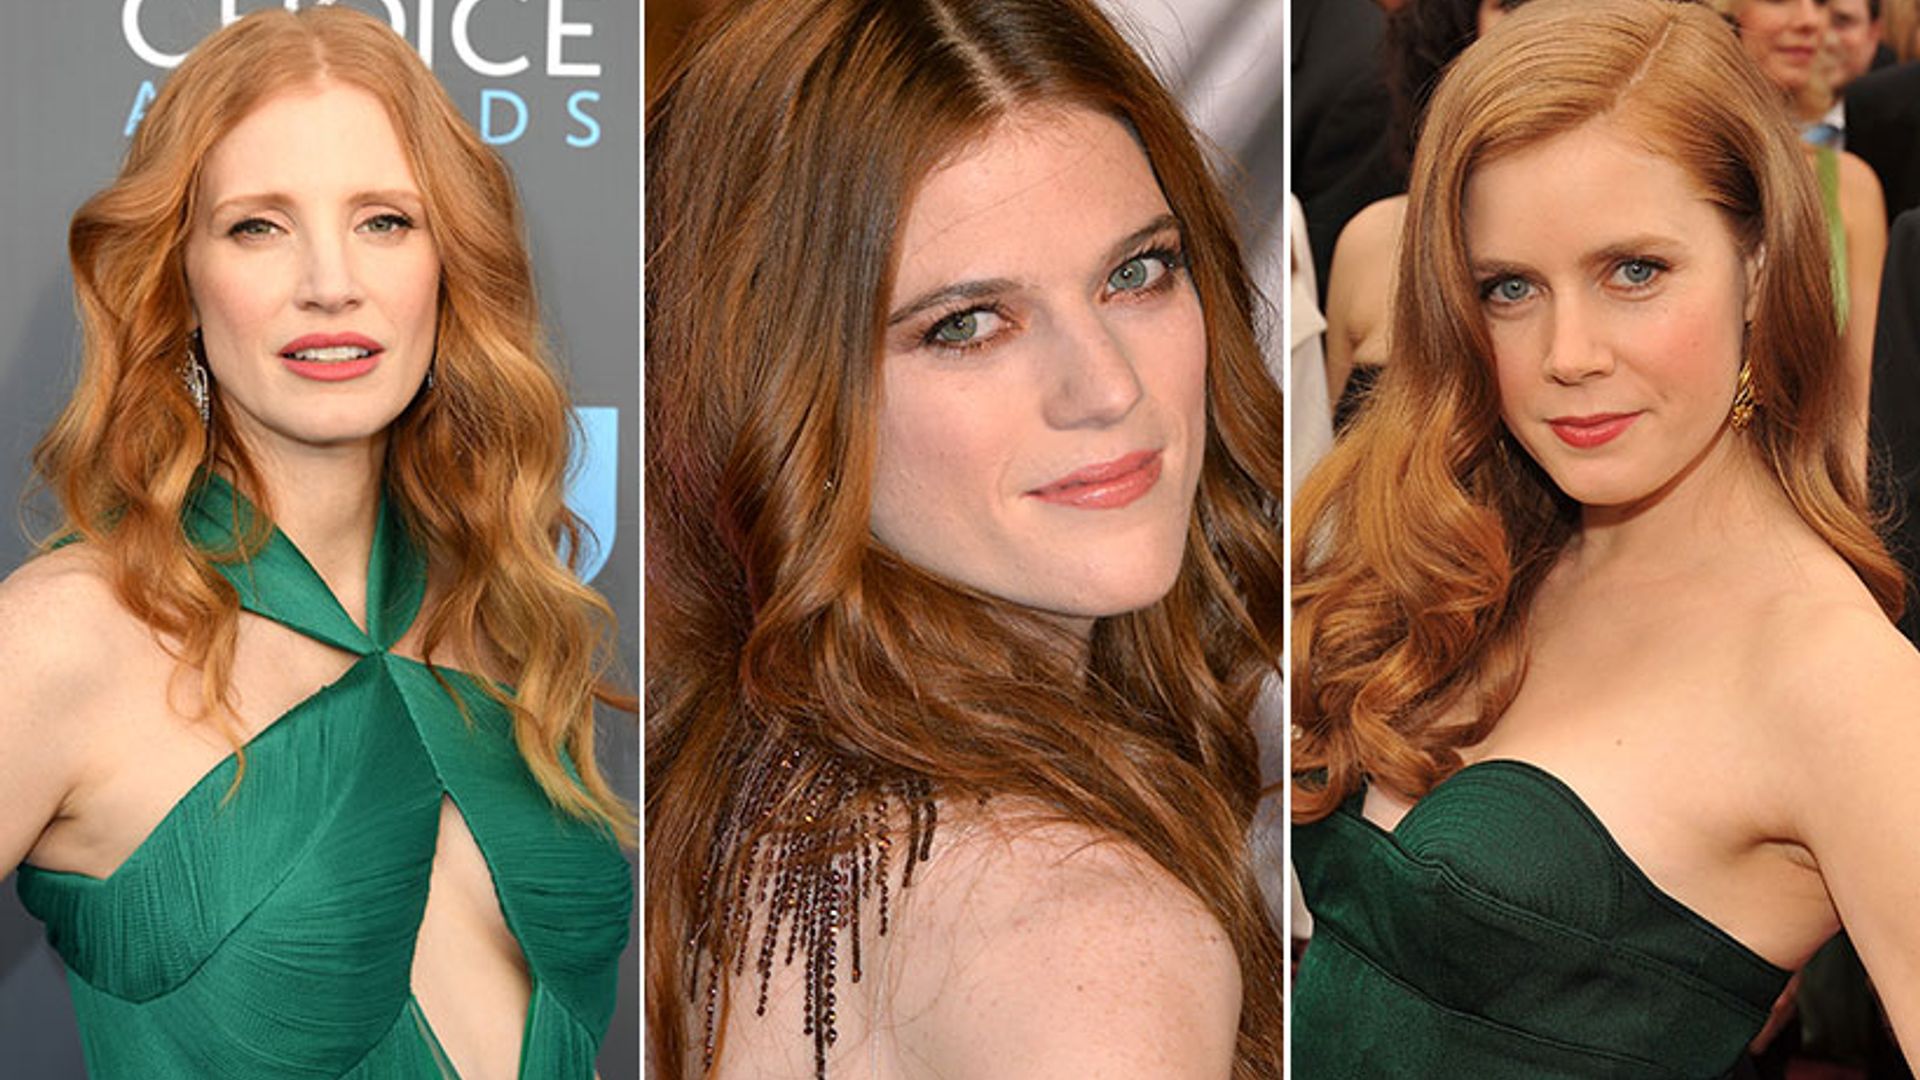 Rose Leslie, Amy Adams and Jessica Chastain